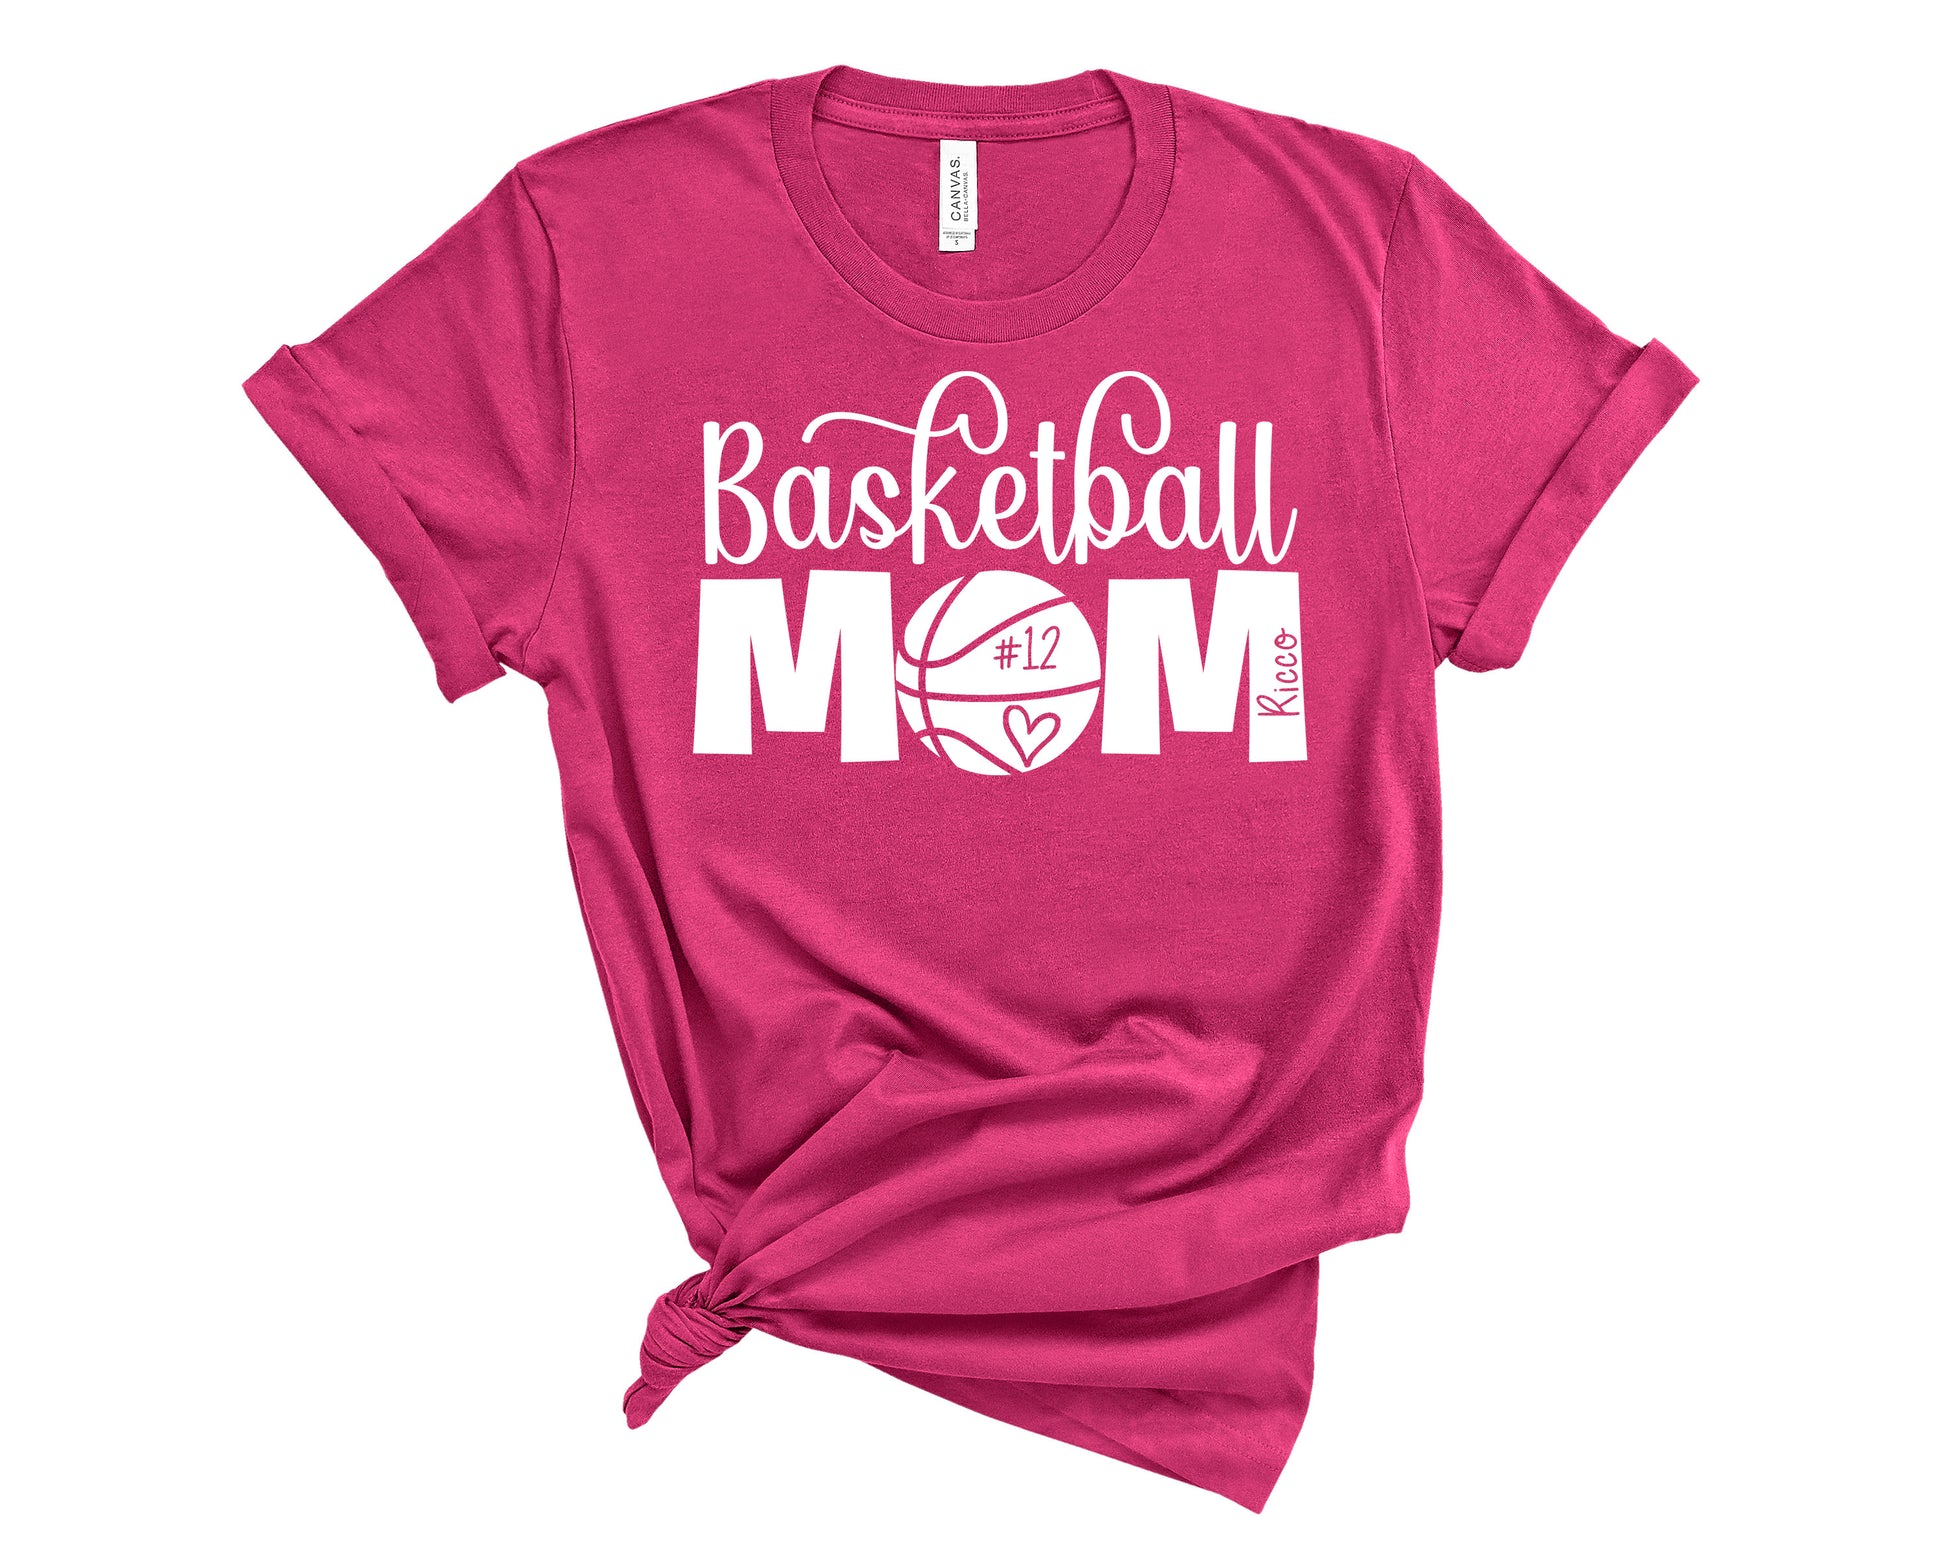 Funny Basketball T-Shirts, Unique Designs